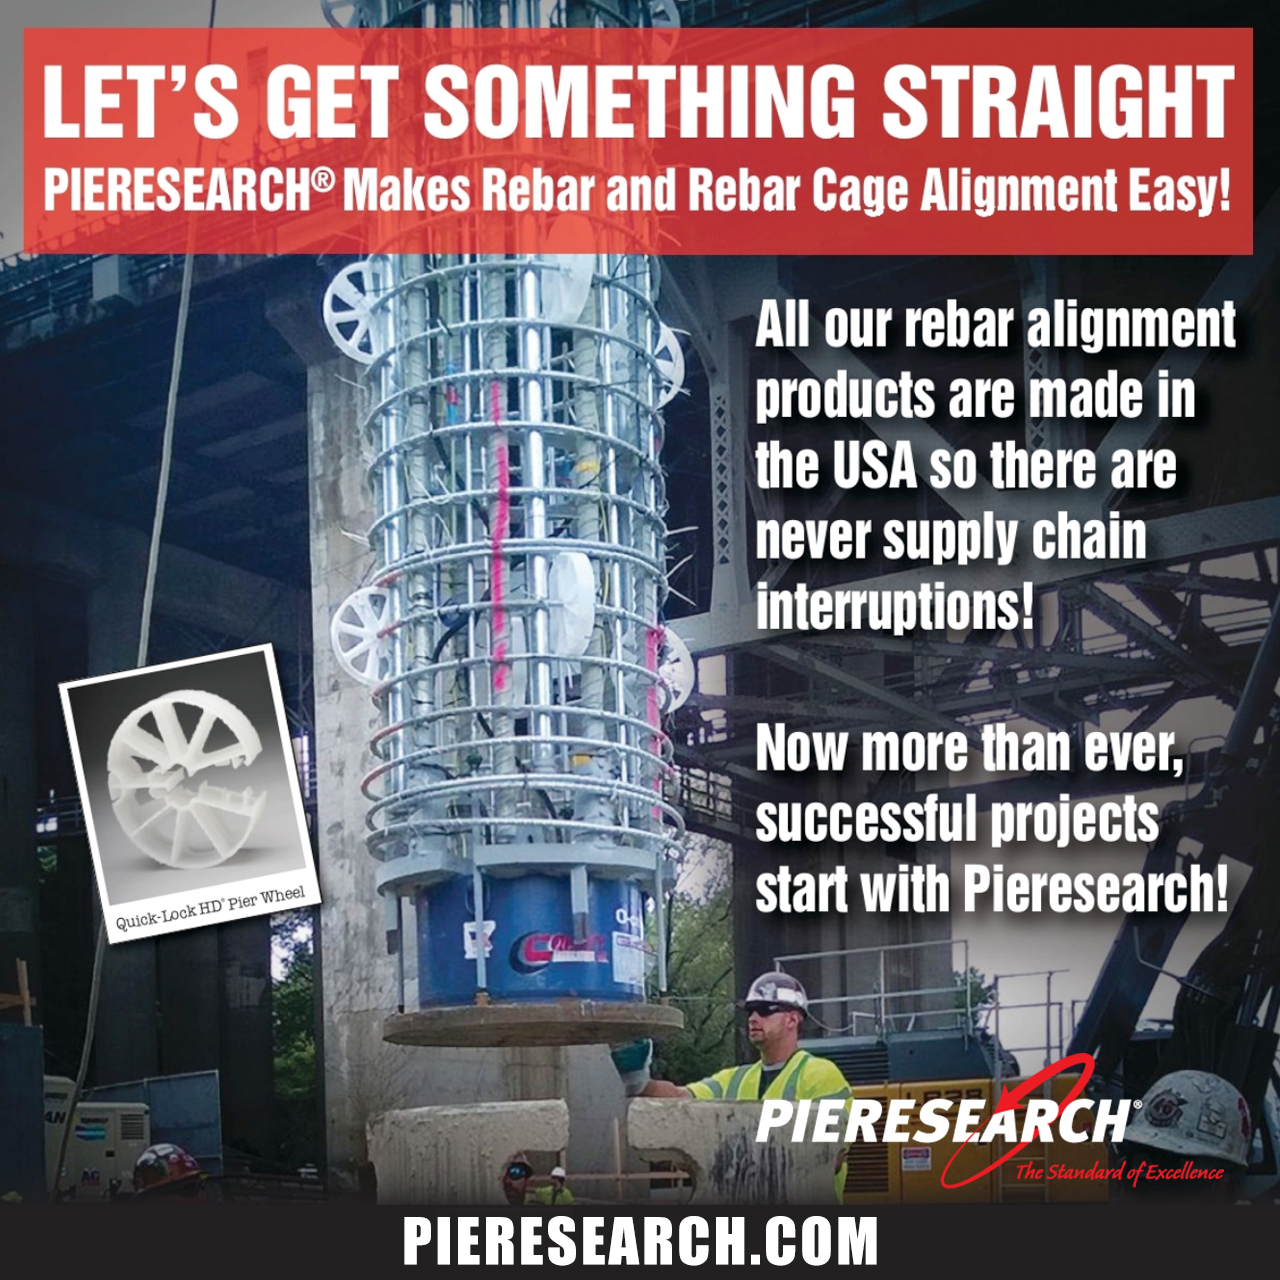 Pieresearch – Let's Get Something Straight